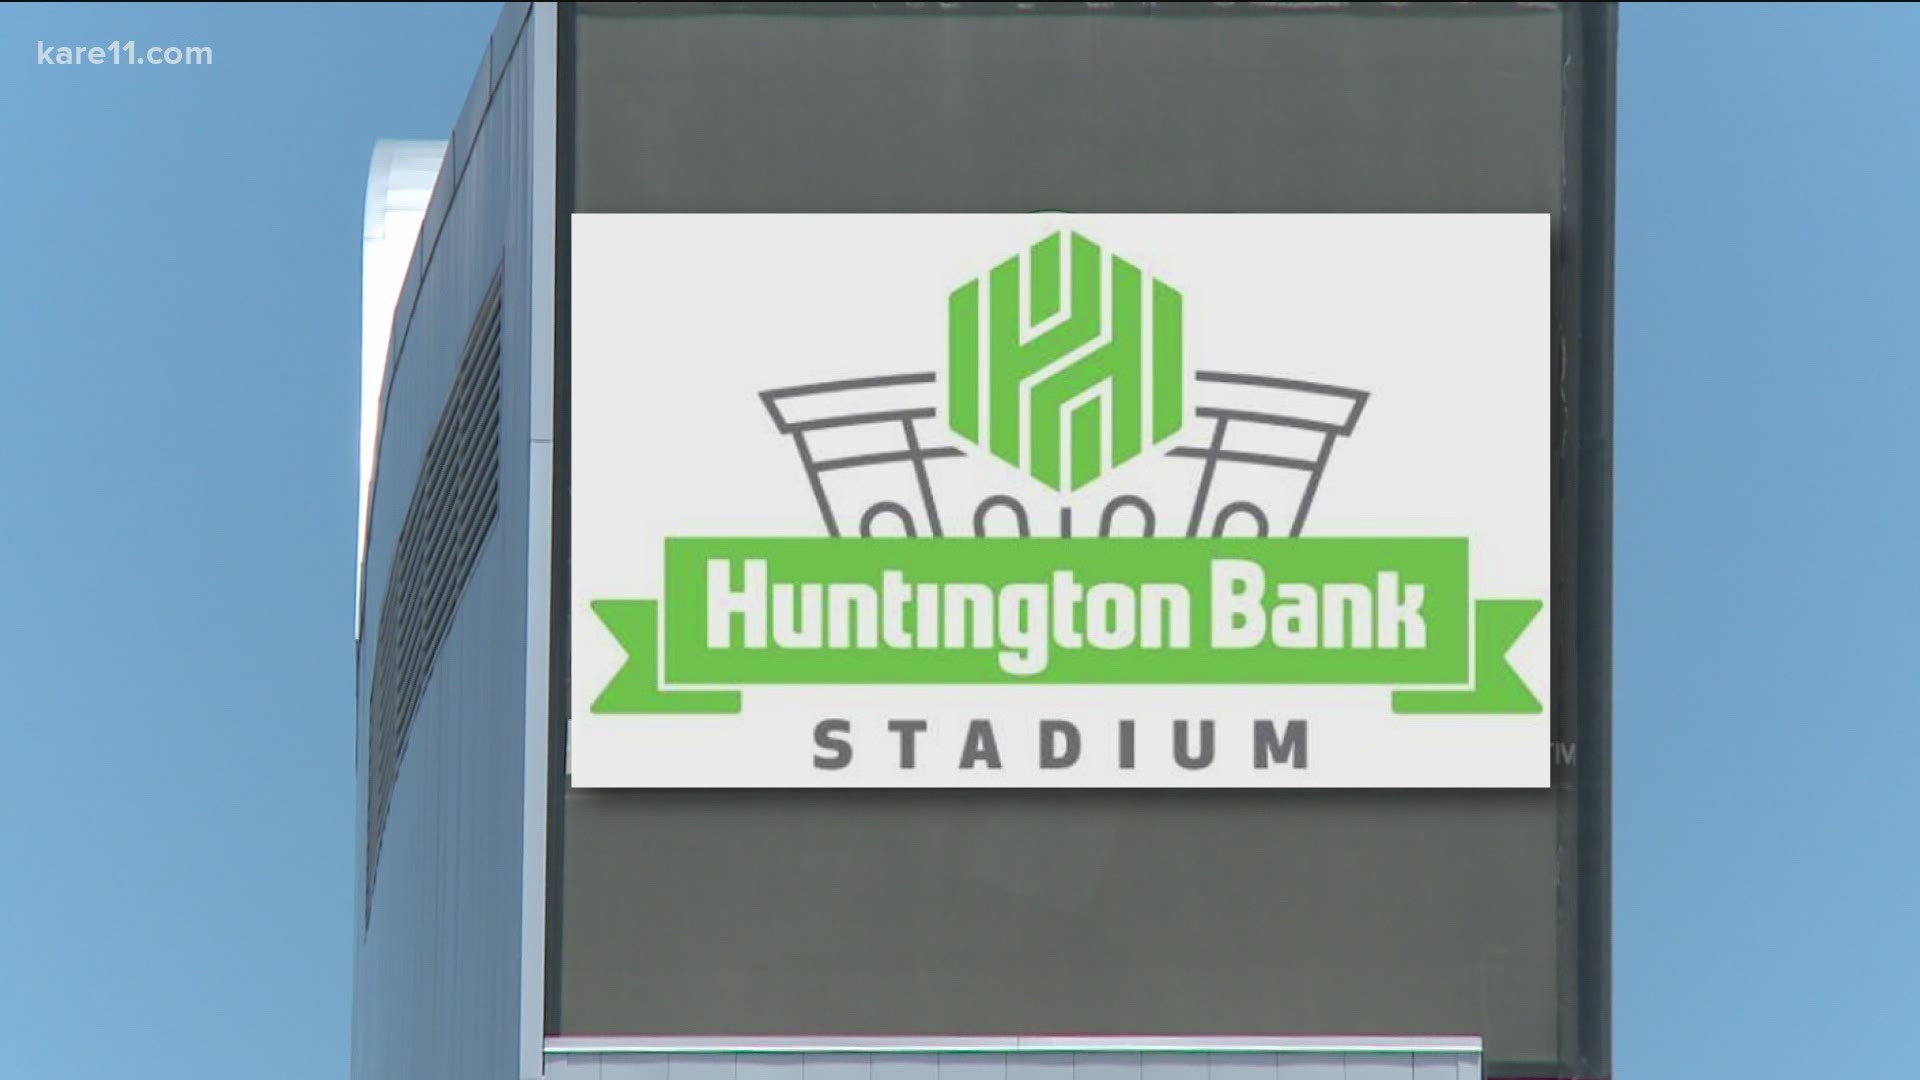 The change comes after Huntington purchased TCF Bank, which held original naming rights to the Gophers' football stadium